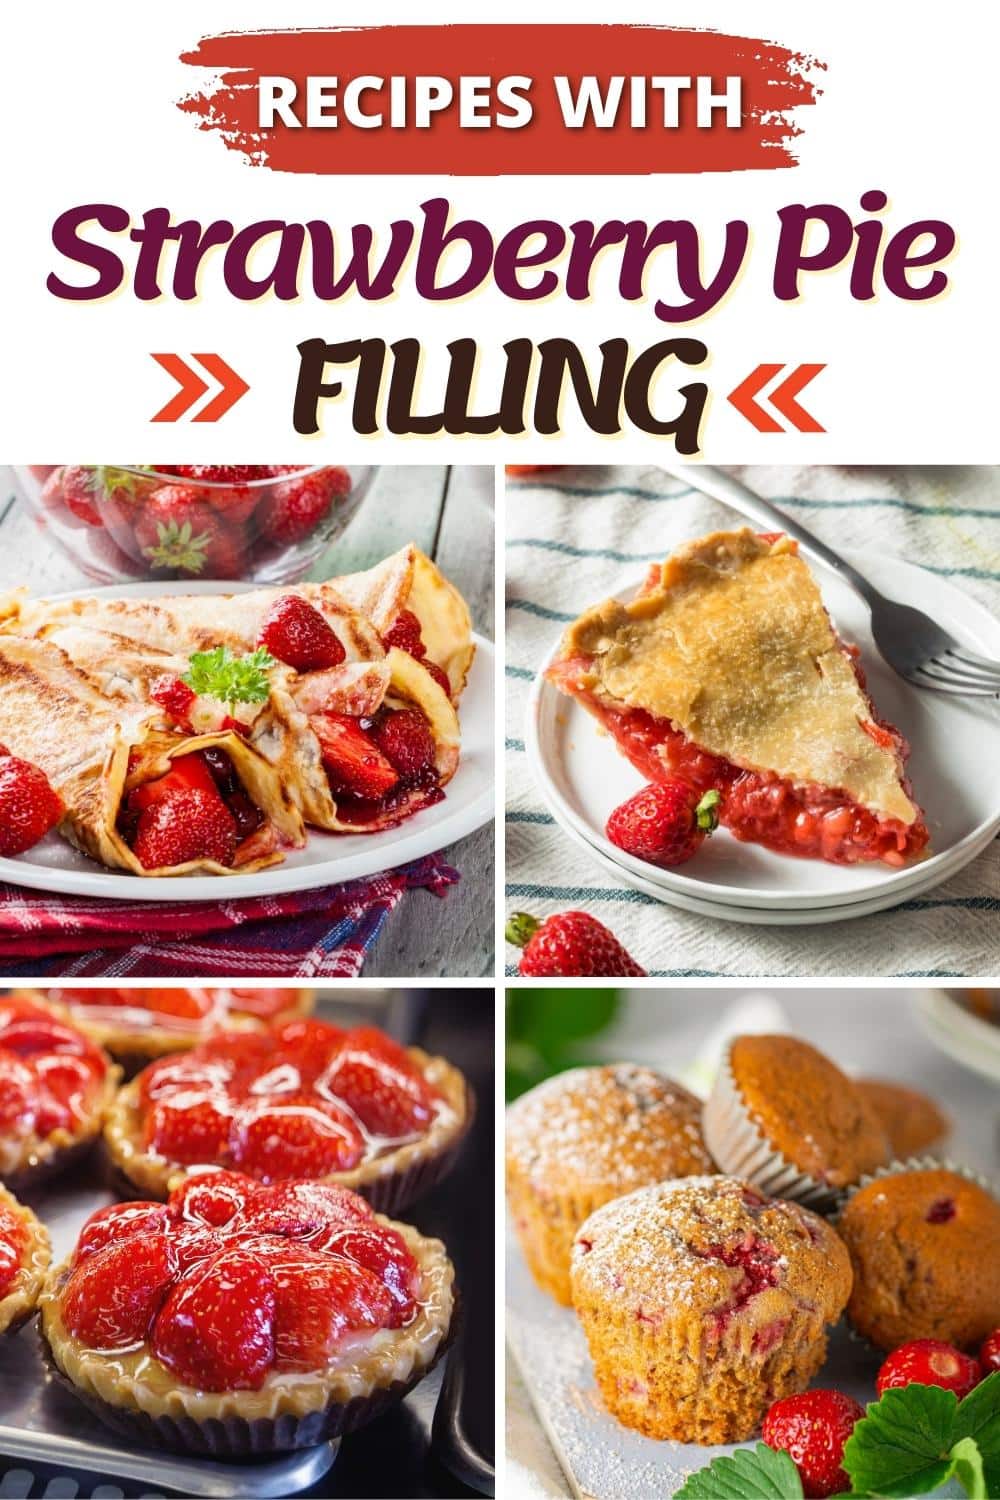 10 Must-Try Recipes with Strawberry Pie Filling - Insanely Good